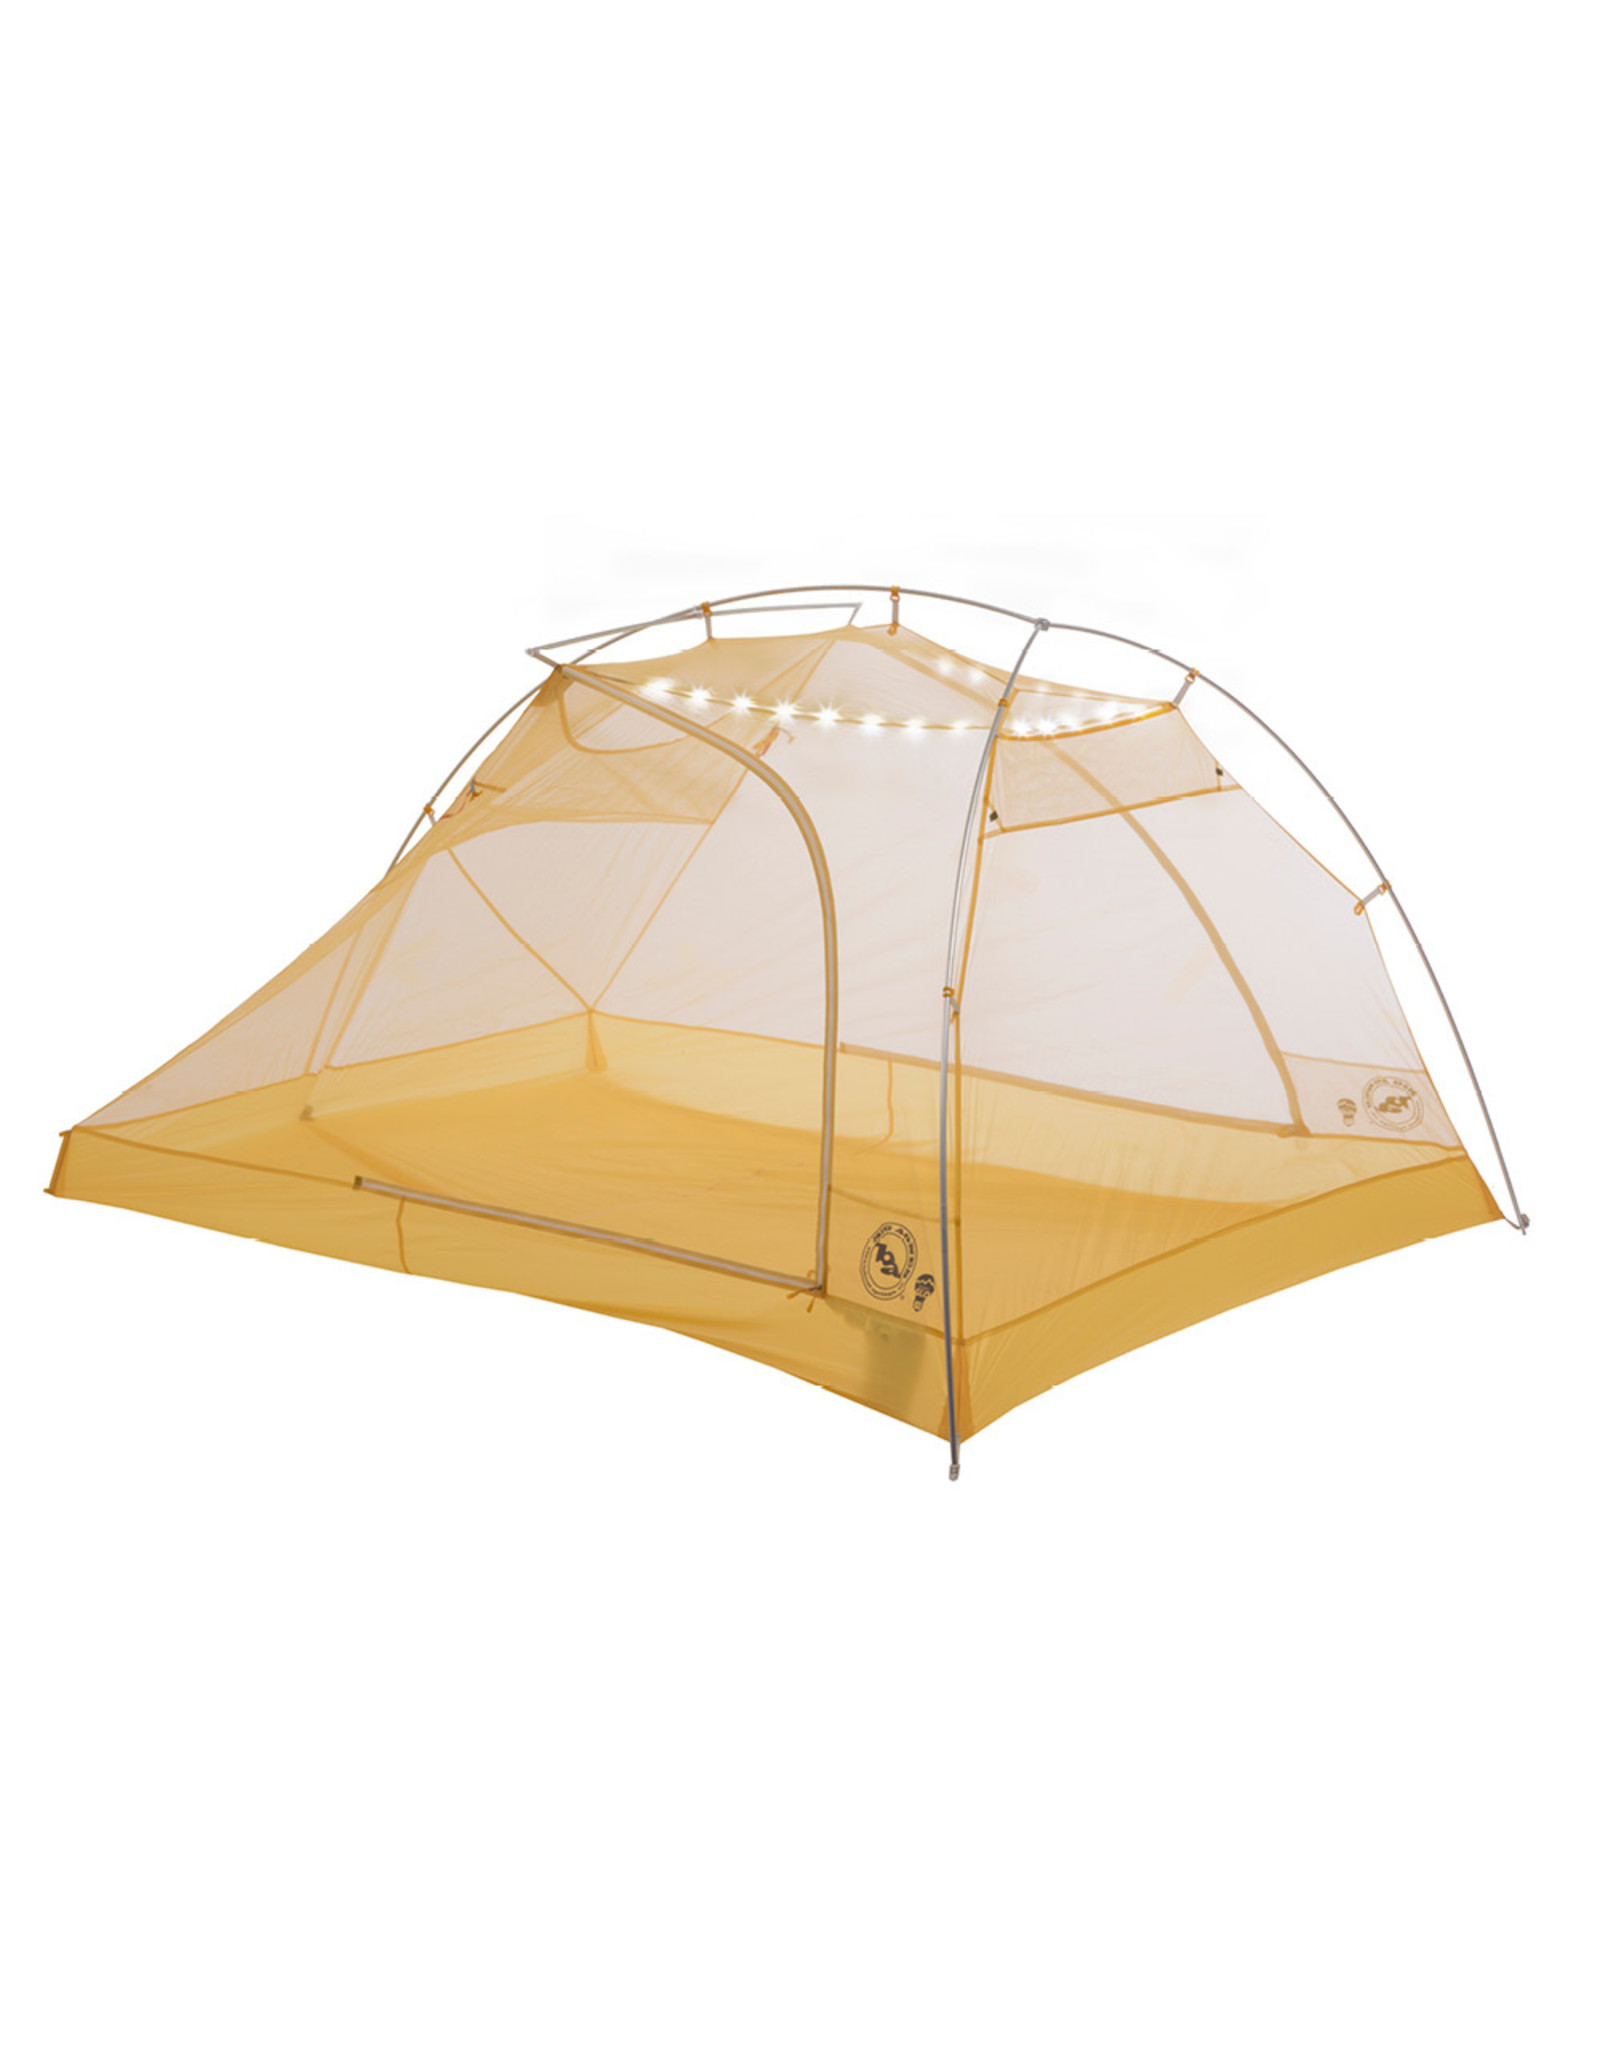 Big Agnes Tiger Wall UL3 mtnGLO Solution Dye - Gray/Yellow